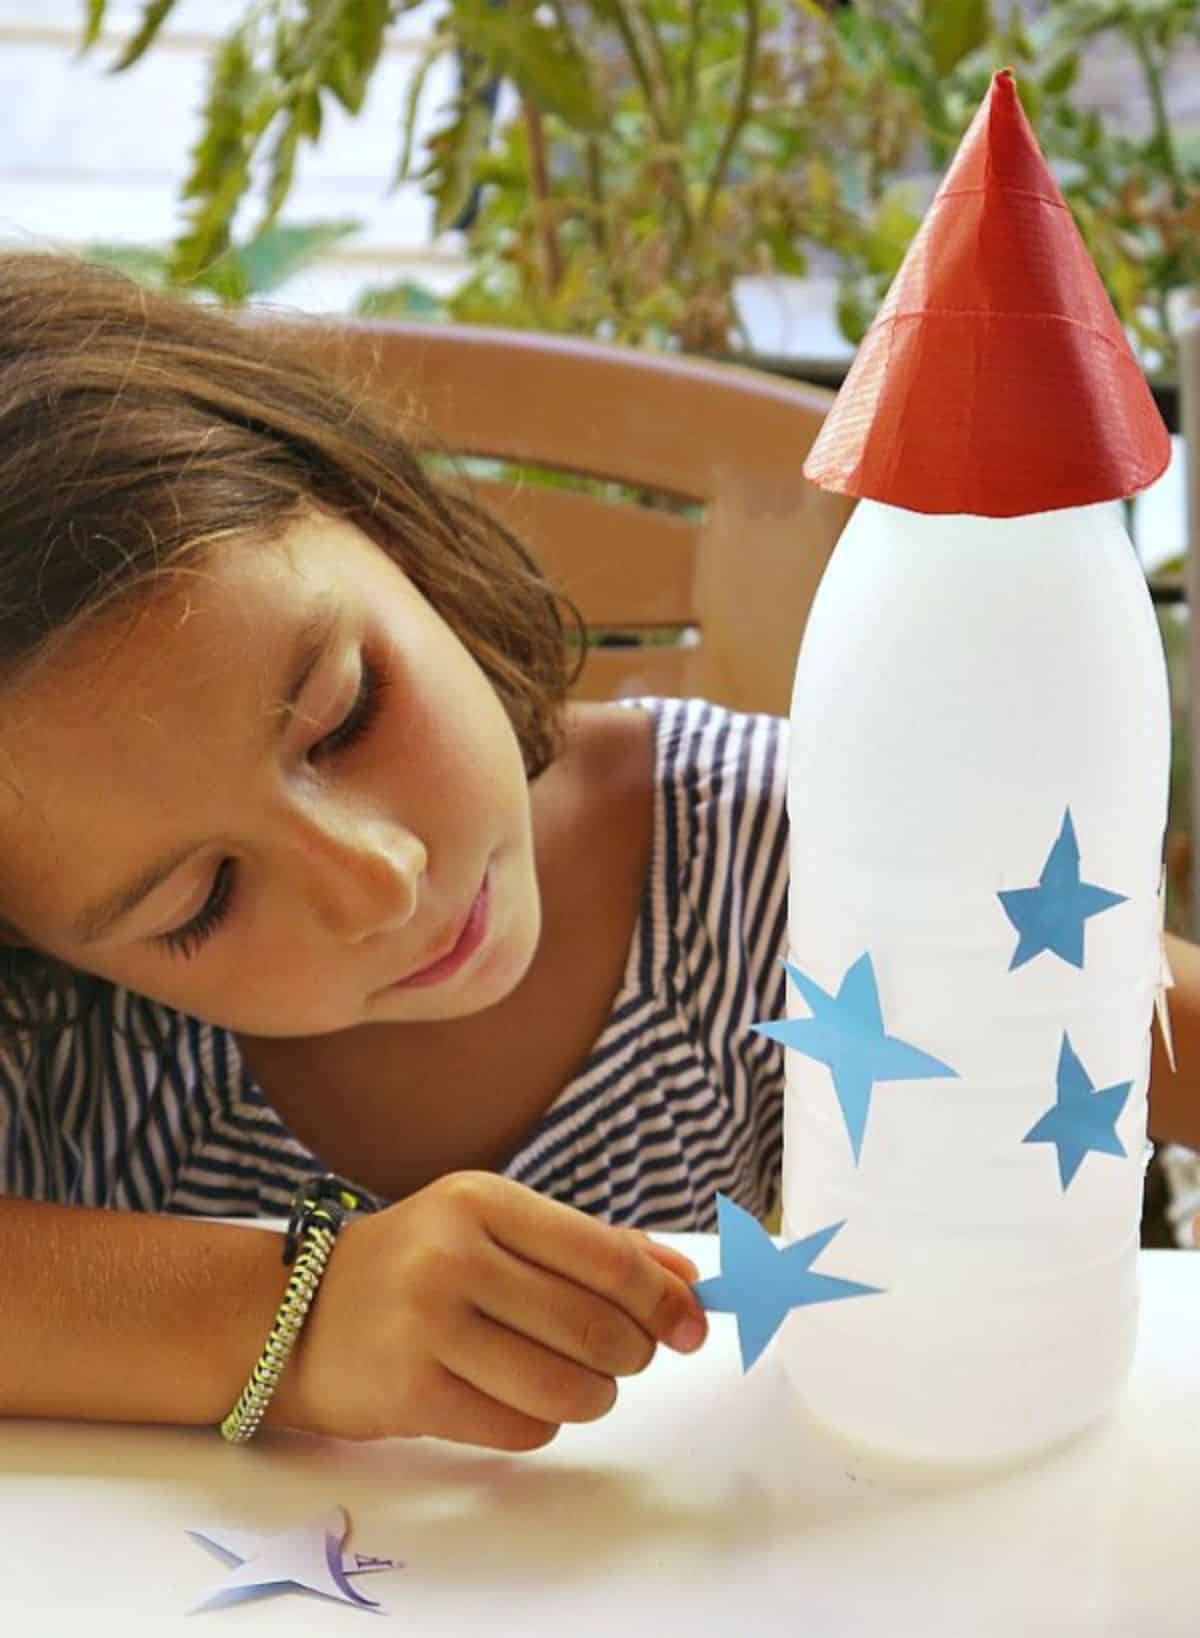 Young girl putting paper starts on a rocket pencil holder.